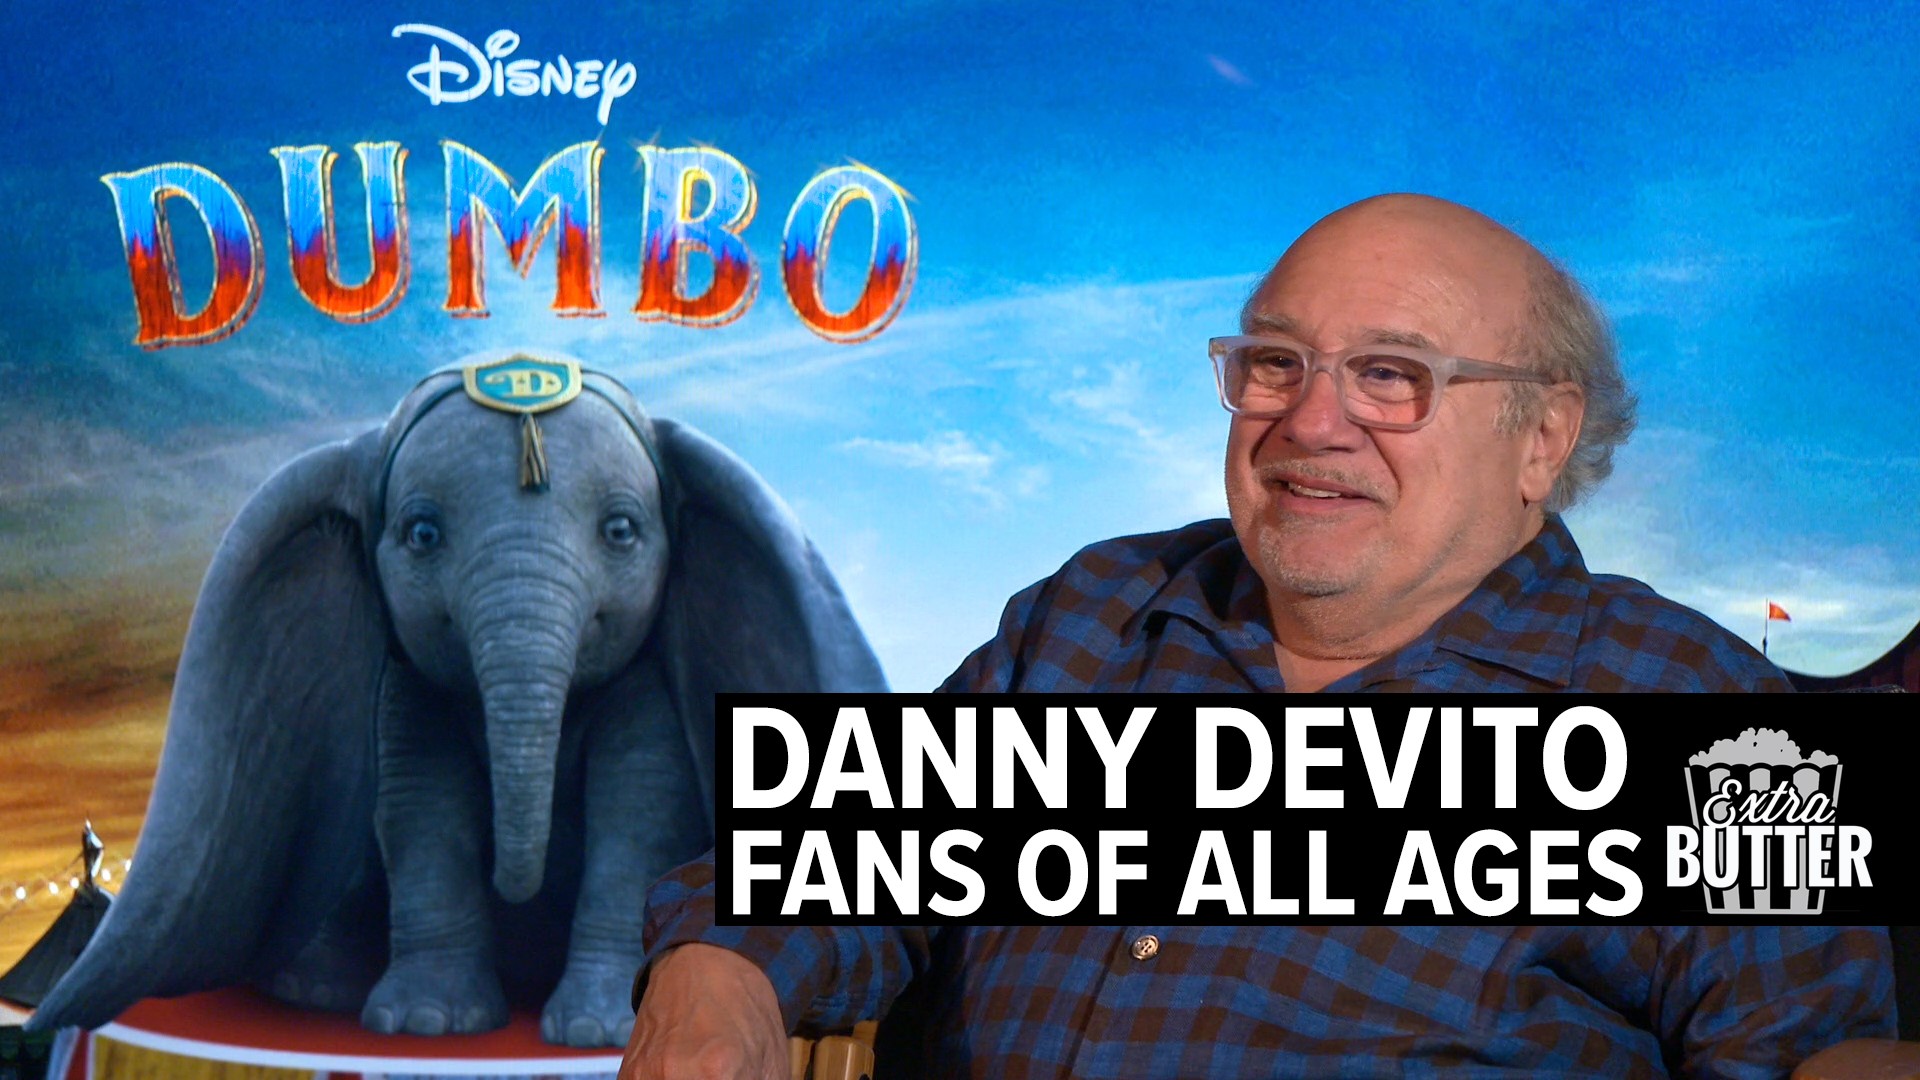 Danny DeVito takes time to look back on his career while talking about his new role in the movie, 'Dumbo." Danny reminisces with Mark S. Allen about 'Taxi,' 'Matilda,' and 'It's Always Sunny in Philadelphia.' He also talks about the wonder of this new 'Dumbo' movie. Interview arranged by Walt Disney Studios Motion Pictures.